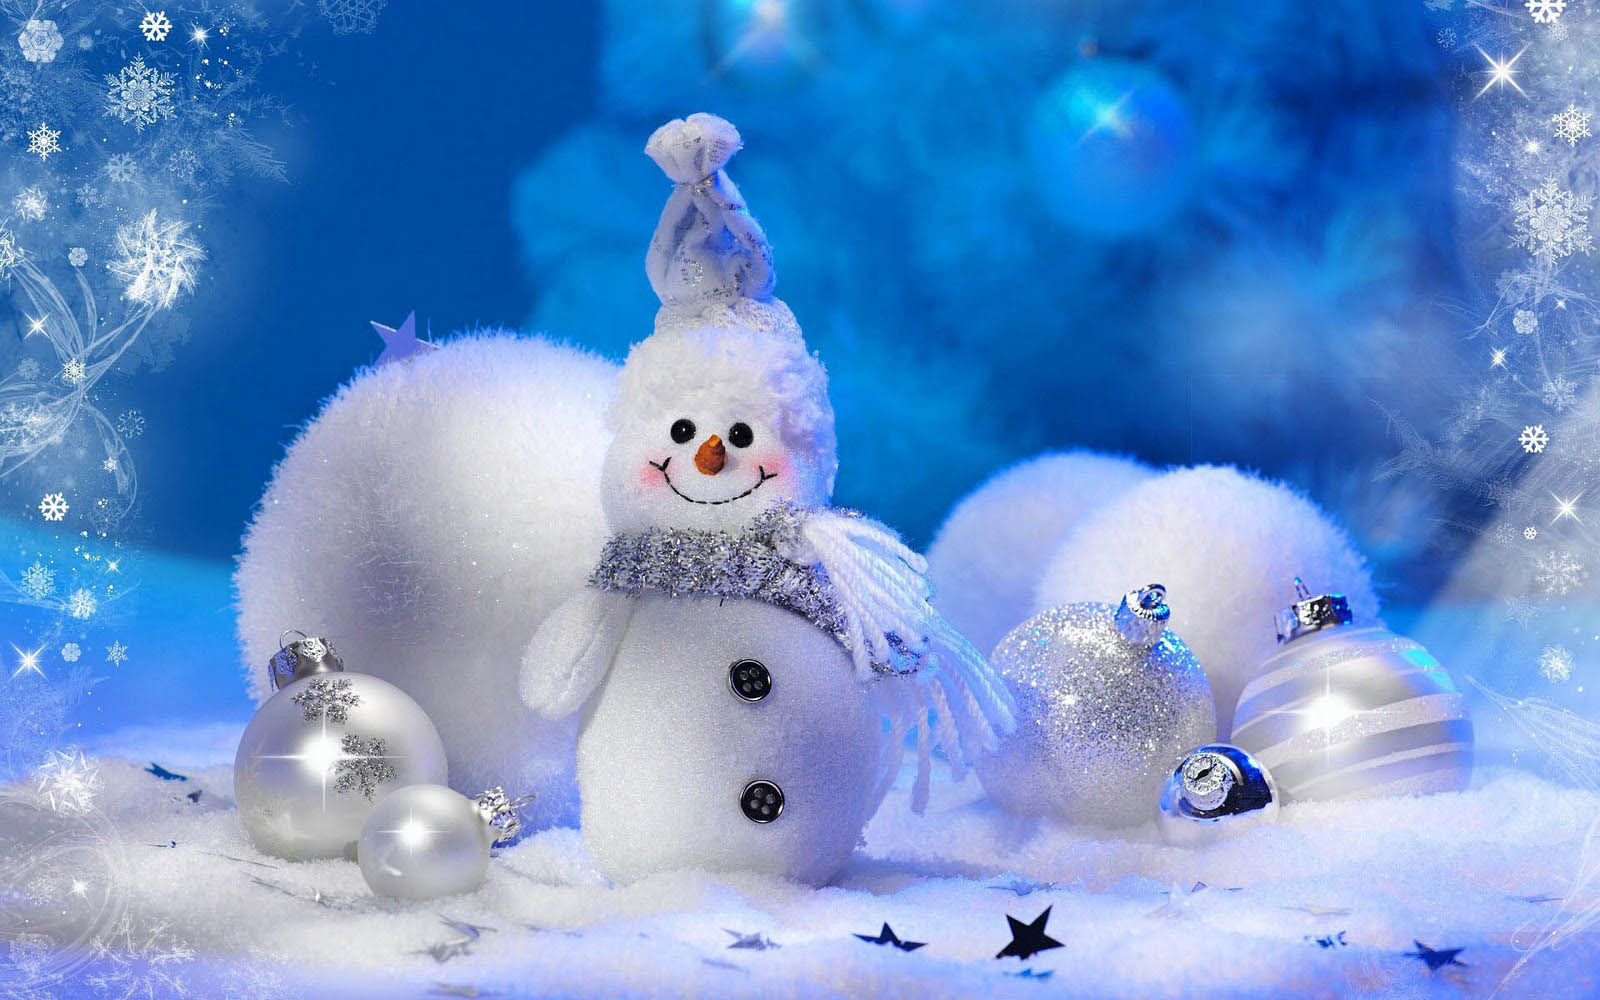 Tag Snowman Wallpaper Background Paos Pictures And Image For